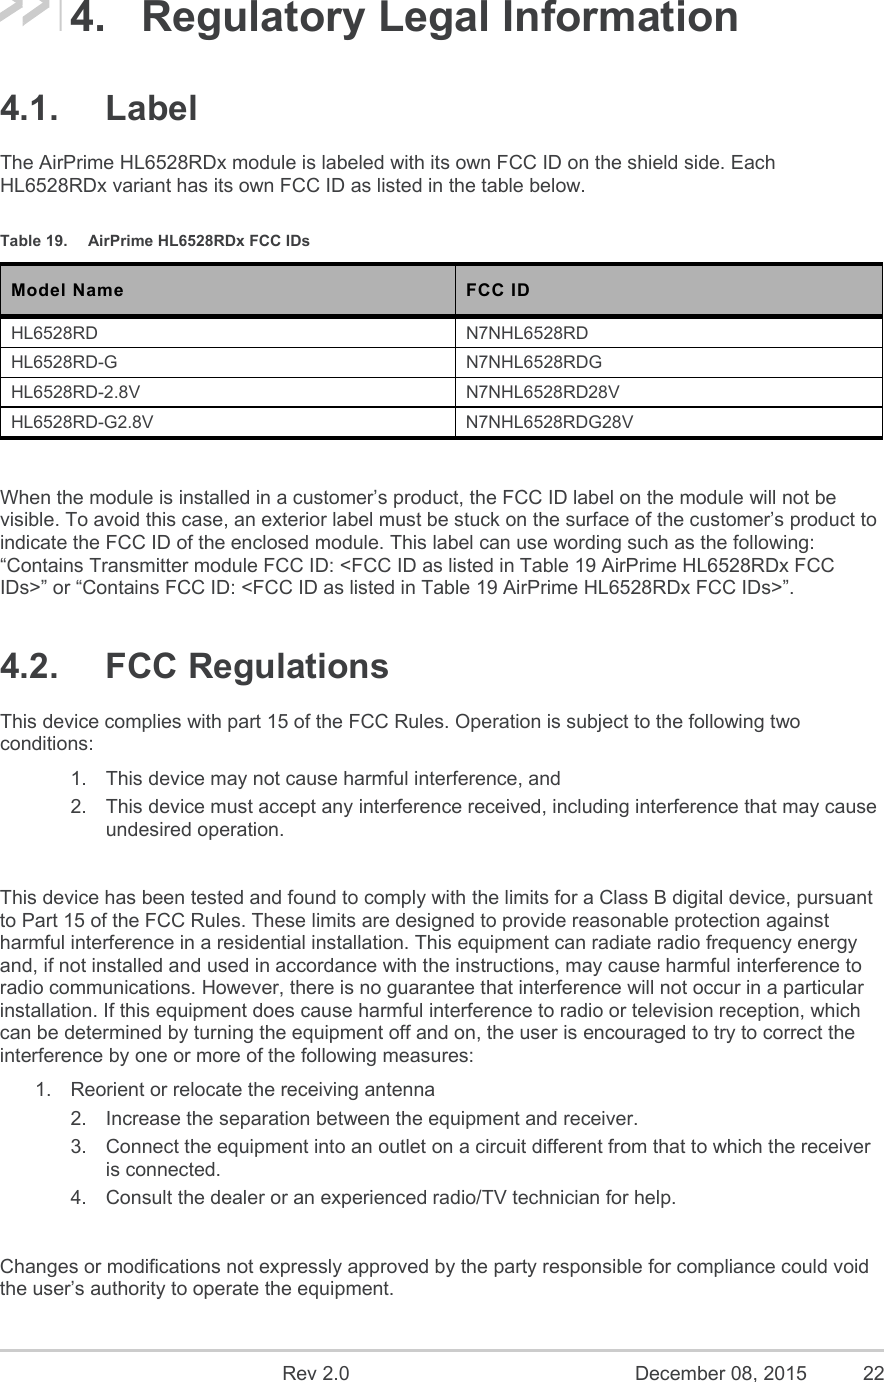    Rev 2.0  December 08, 2015  22 4.  Regulatory Legal Information 4.1.  Label The AirPrime HL6528RDx module is labeled with its own FCC ID on the shield side. Each HL6528RDx variant has its own FCC ID as listed in the table below. Table 19.  AirPrime HL6528RDx FCC IDs Model Name  FCC ID HL6528RD  N7NHL6528RD HL6528RD-G  N7NHL6528RDG HL6528RD-2.8V  N7NHL6528RD28V HL6528RD-G2.8V  N7NHL6528RDG28V  When the module is installed in a customer’s product, the FCC ID label on the module will not be visible. To avoid this case, an exterior label must be stuck on the surface of the customer’s product to indicate the FCC ID of the enclosed module. This label can use wording such as the following: “Contains Transmitter module FCC ID: &lt;FCC ID as listed in Table 19 AirPrime HL6528RDx FCC IDs&gt;” or “Contains FCC ID: &lt;FCC ID as listed in Table 19 AirPrime HL6528RDx FCC IDs&gt;”. 4.2.  FCC Regulations This device complies with part 15 of the FCC Rules. Operation is subject to the following two conditions: 1.  This device may not cause harmful interference, and 2.  This device must accept any interference received, including interference that may cause undesired operation.  This device has been tested and found to comply with the limits for a Class B digital device, pursuant to Part 15 of the FCC Rules. These limits are designed to provide reasonable protection against harmful interference in a residential installation. This equipment can radiate radio frequency energy and, if not installed and used in accordance with the instructions, may cause harmful interference to radio communications. However, there is no guarantee that interference will not occur in a particular installation. If this equipment does cause harmful interference to radio or television reception, which can be determined by turning the equipment off and on, the user is encouraged to try to correct the interference by one or more of the following measures: 1.  Reorient or relocate the receiving antenna 2.  Increase the separation between the equipment and receiver. 3.  Connect the equipment into an outlet on a circuit different from that to which the receiver is connected. 4.  Consult the dealer or an experienced radio/TV technician for help.  Changes or modifications not expressly approved by the party responsible for compliance could void the user’s authority to operate the equipment. 